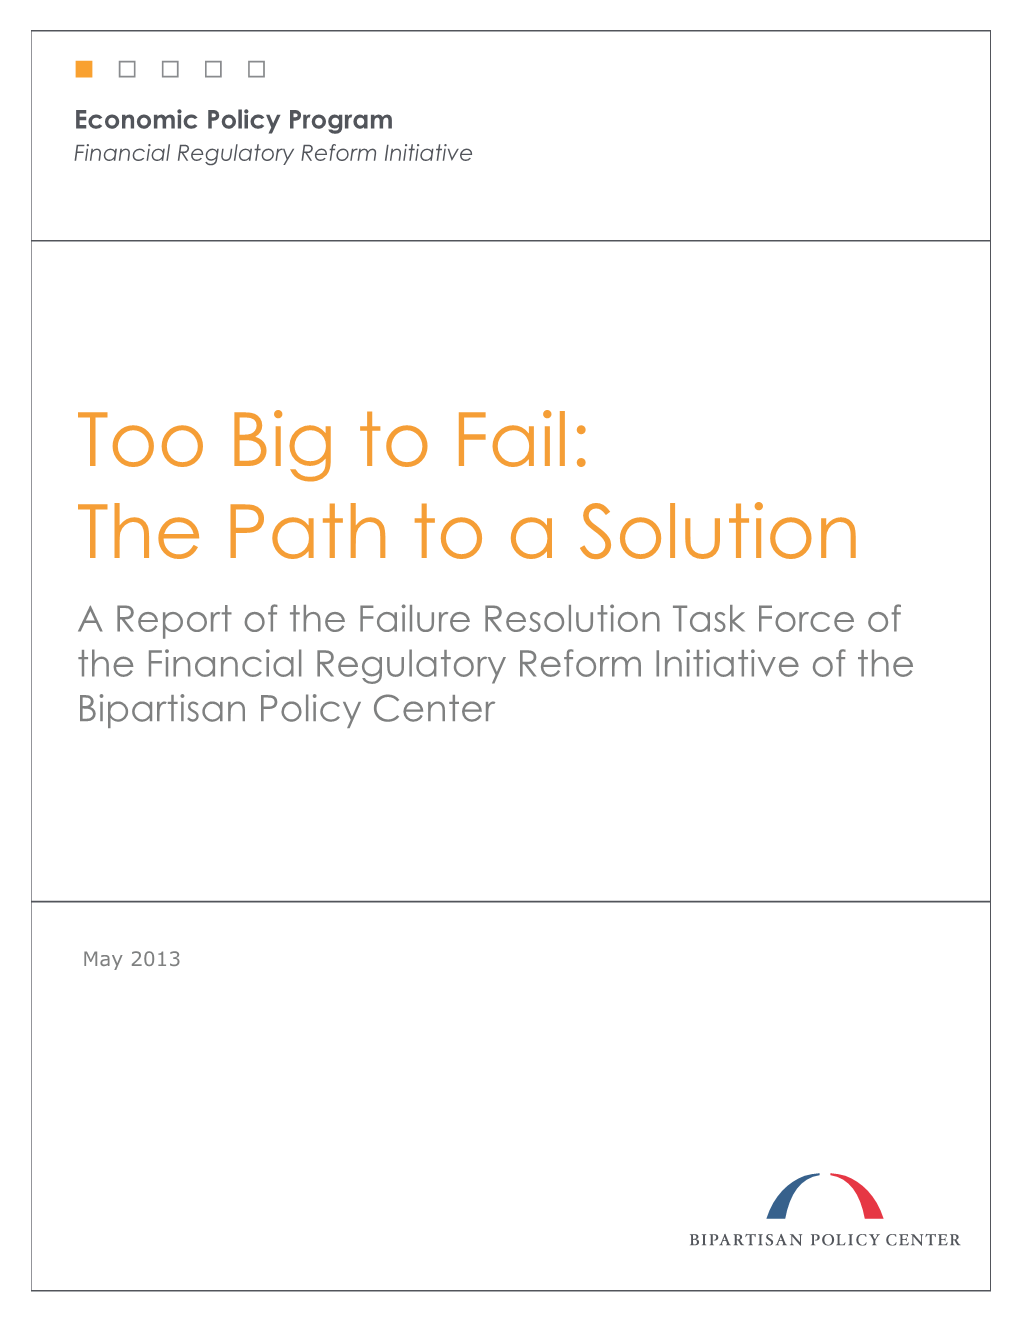 Too Big to Fail: the Path to a Solution a Report of the Failure Resolution Task Force of the Financial Regulatory Reform Initiative of the Bipartisan Policy Center